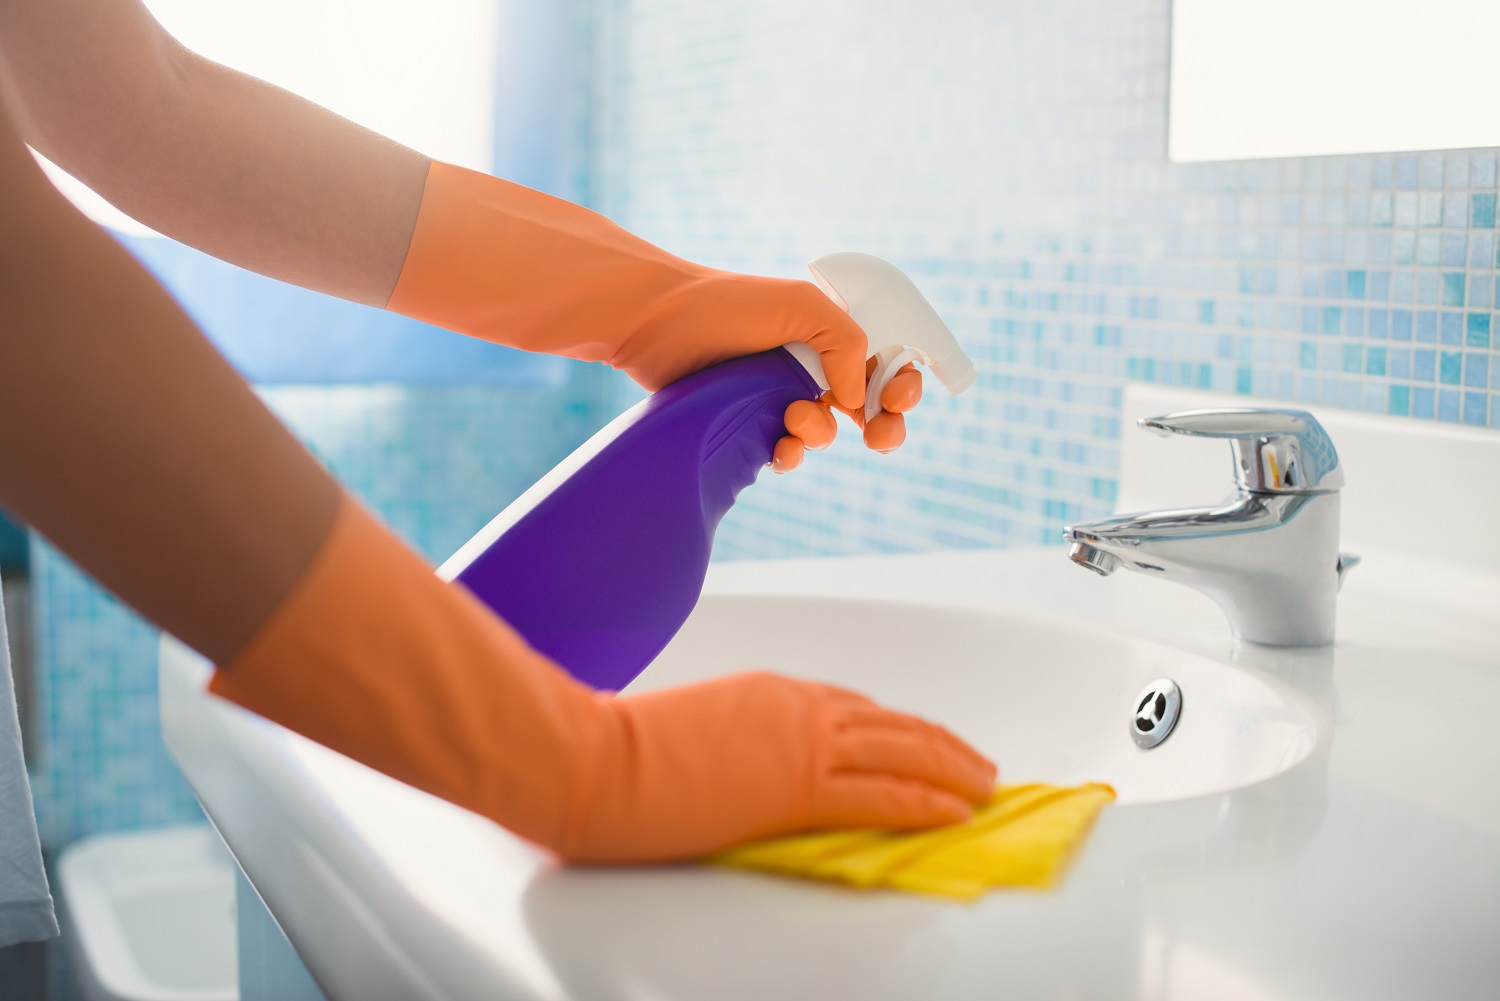 Close up image of someone wearing orange rubber gloves cleaning a basin tap using a cloth and spray bottle